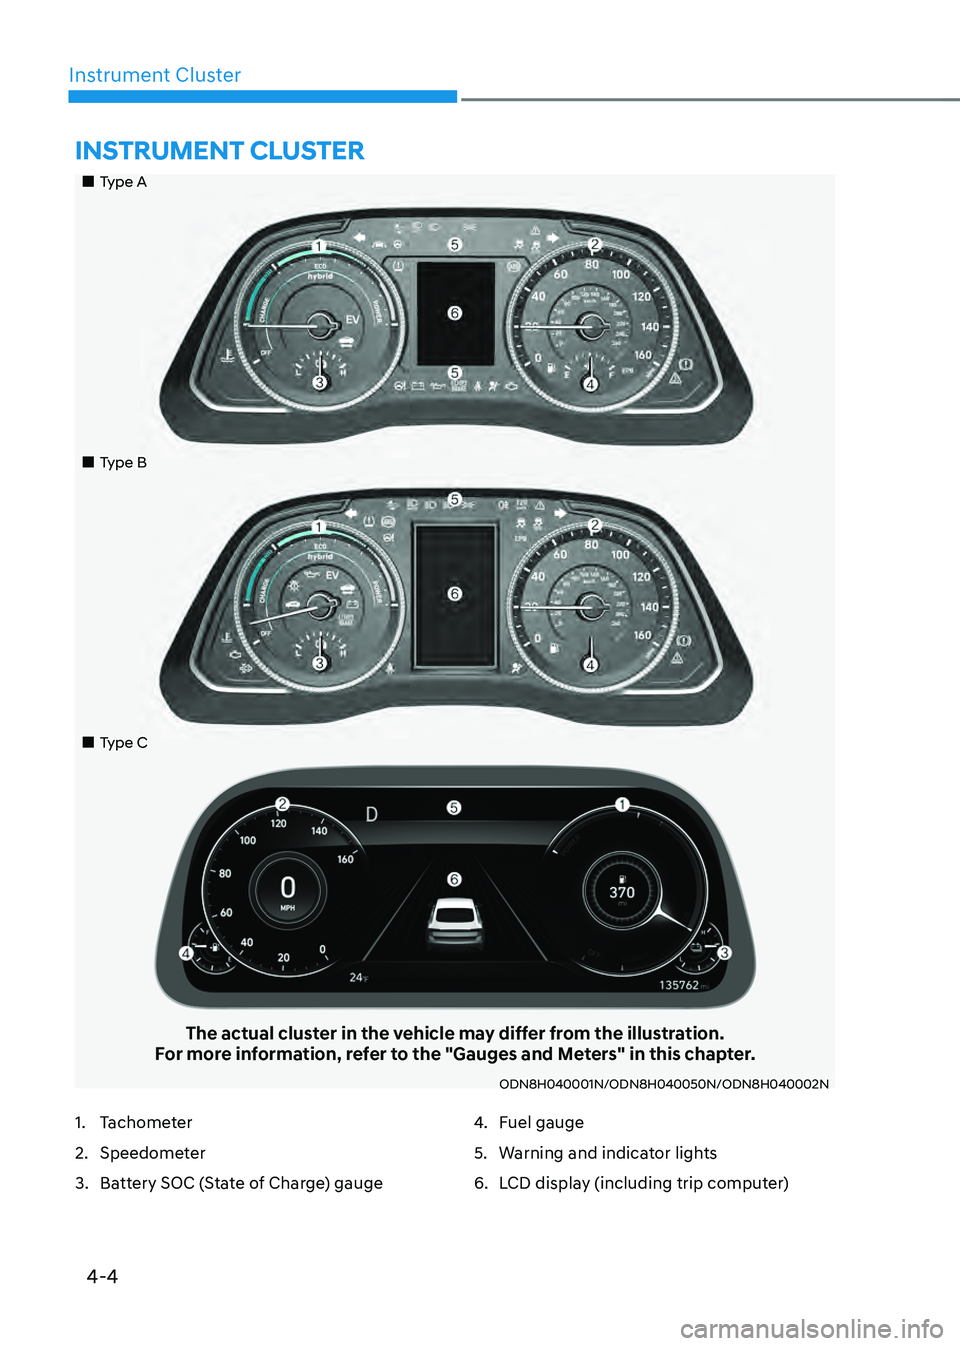 HYUNDAI SONATA HYBRID 2022  Owners Manual 4-4
Instrument Cluster
„„Type A
„„Type B
„„Type C
The actual cluster in the vehicle may differ from the illustration.For more information, refer to the "Gauges and Me